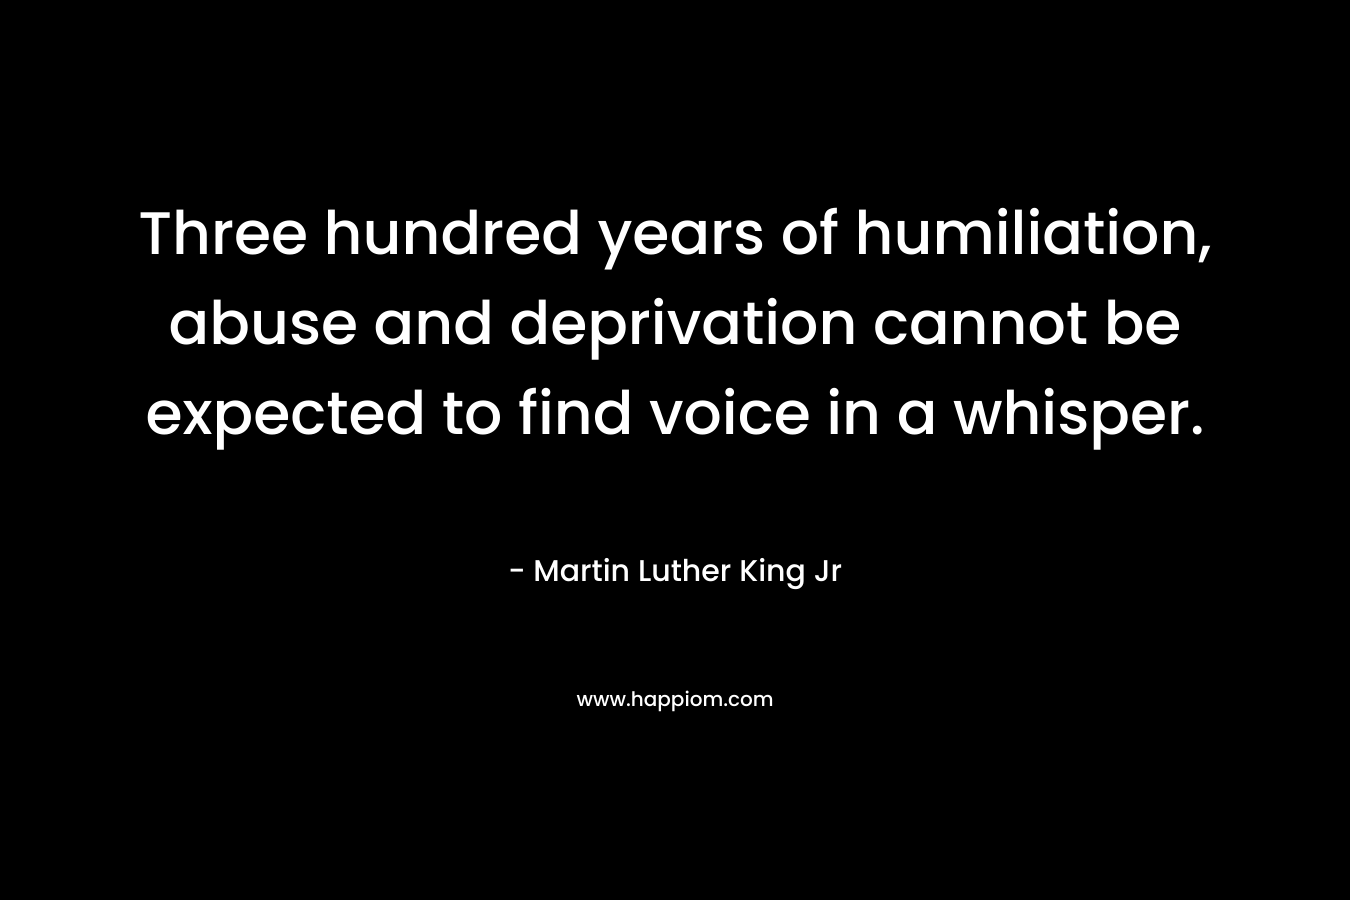 Three hundred years of humiliation, abuse and deprivation cannot be expected to find voice in a whisper. – Martin Luther King Jr